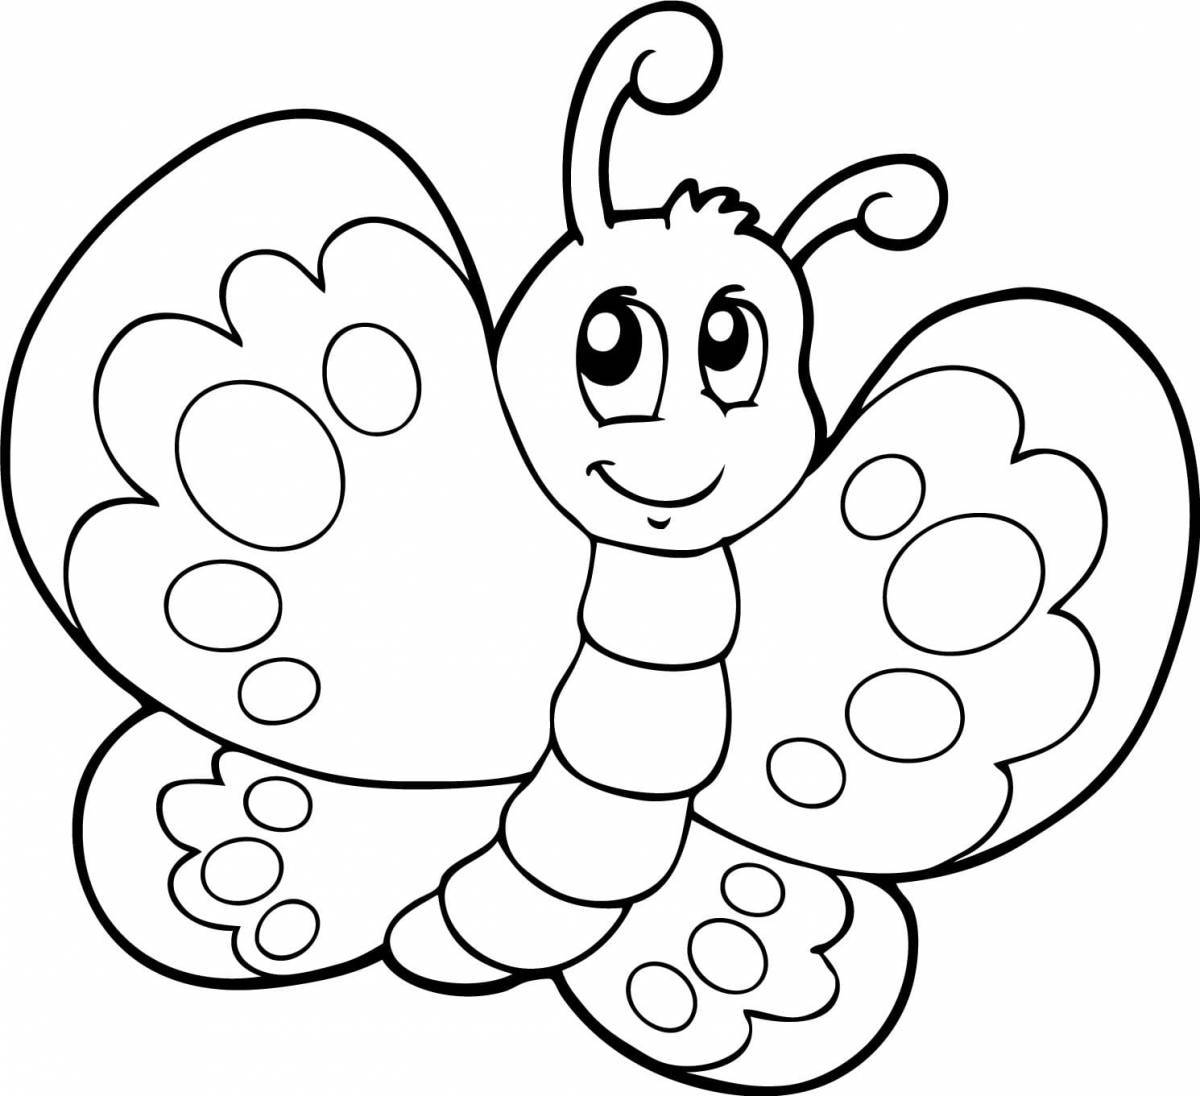 Fun coloring book of butterflies for 3-4 year olds